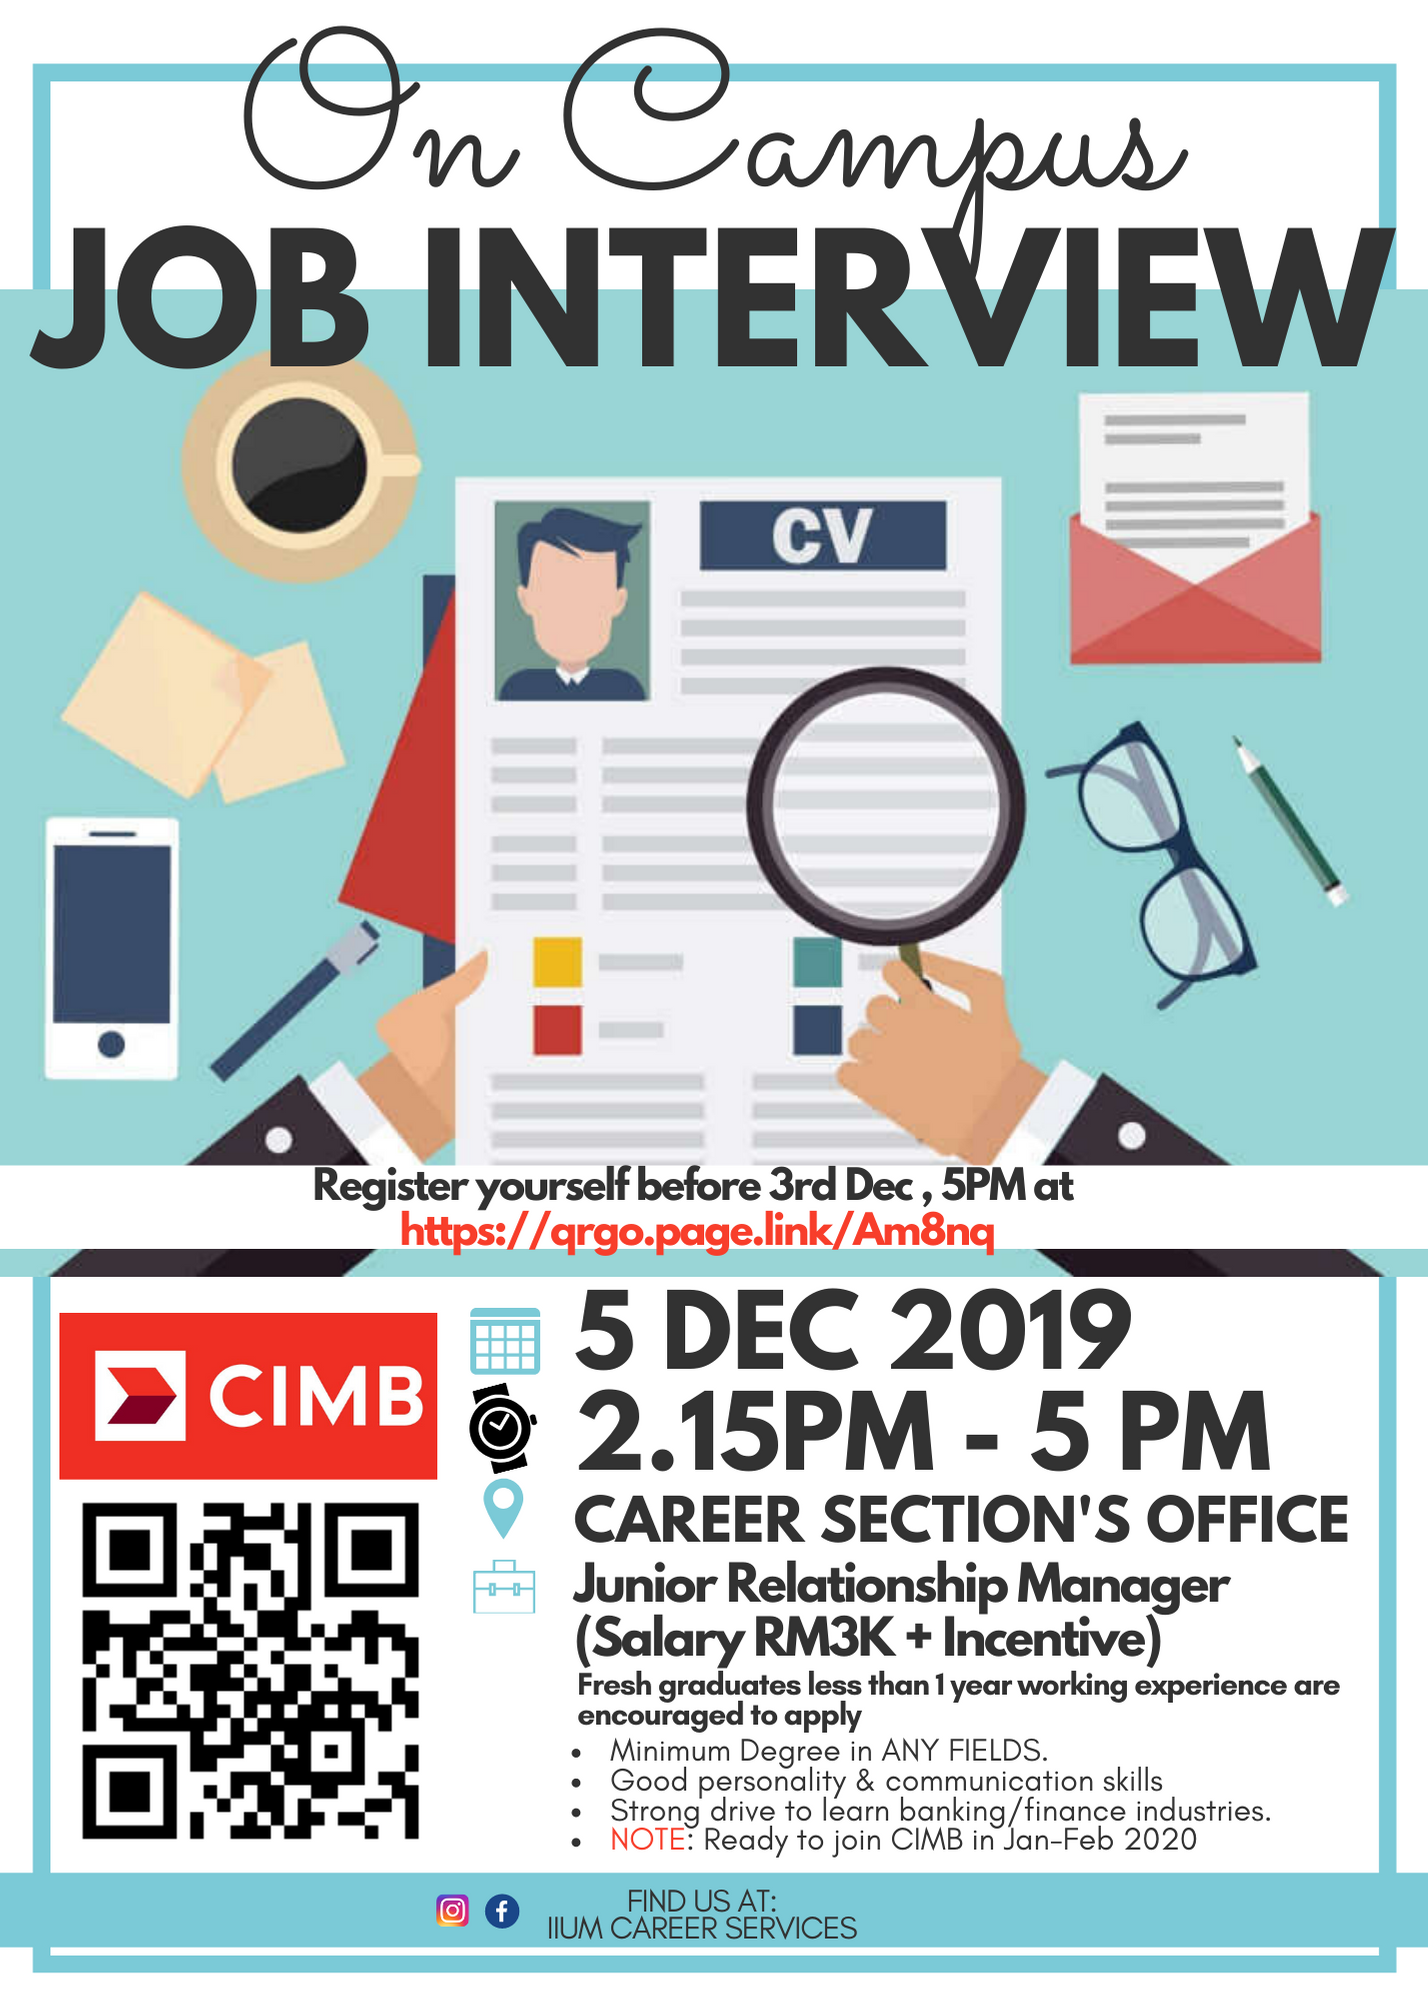 ON CAMPUS JOB INTERVIEW WITH CIMB